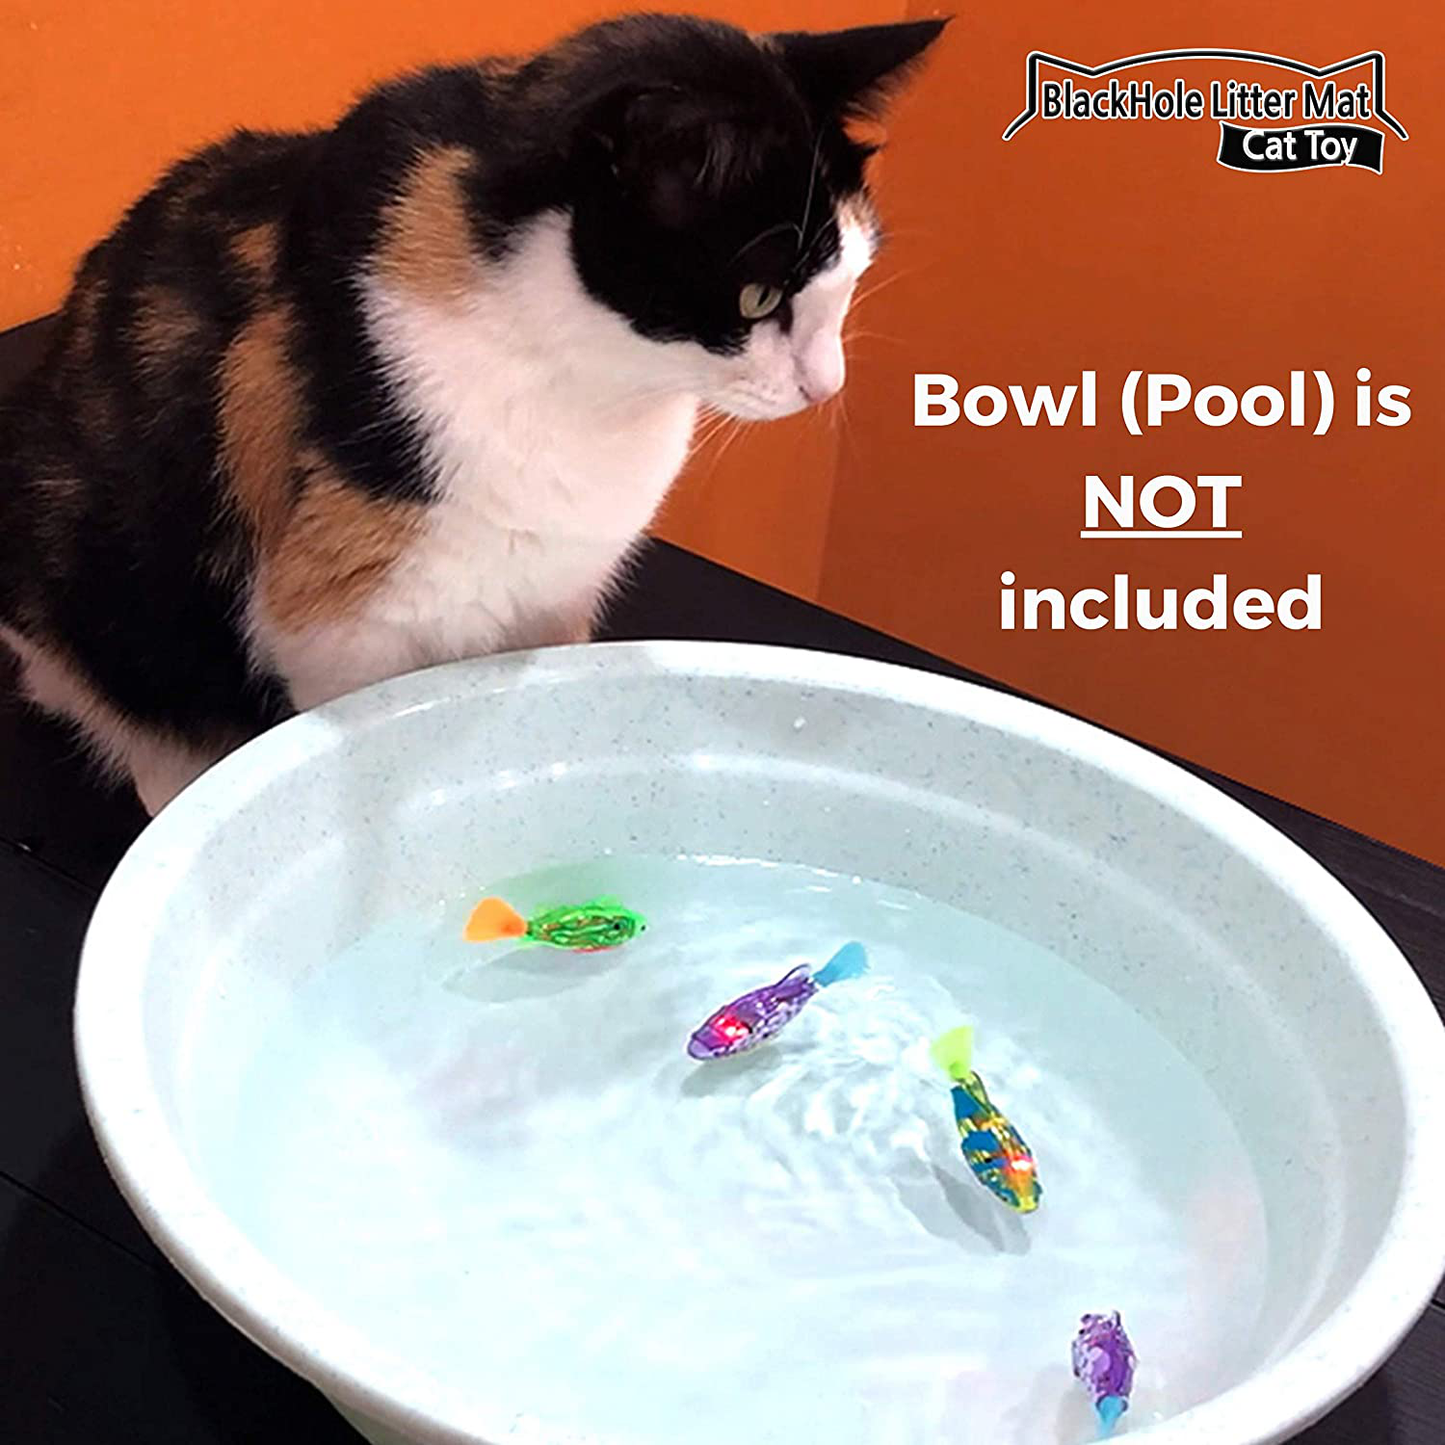 Indoor Cat Interactive Swimming Fish Toy- Best Water Cat Toy for Indoor Cats, Play Fishing, Good Exercise Activity, Drink More Water, Led Light, Battery Included (Swimming Bowl/Pool Is Not Included)